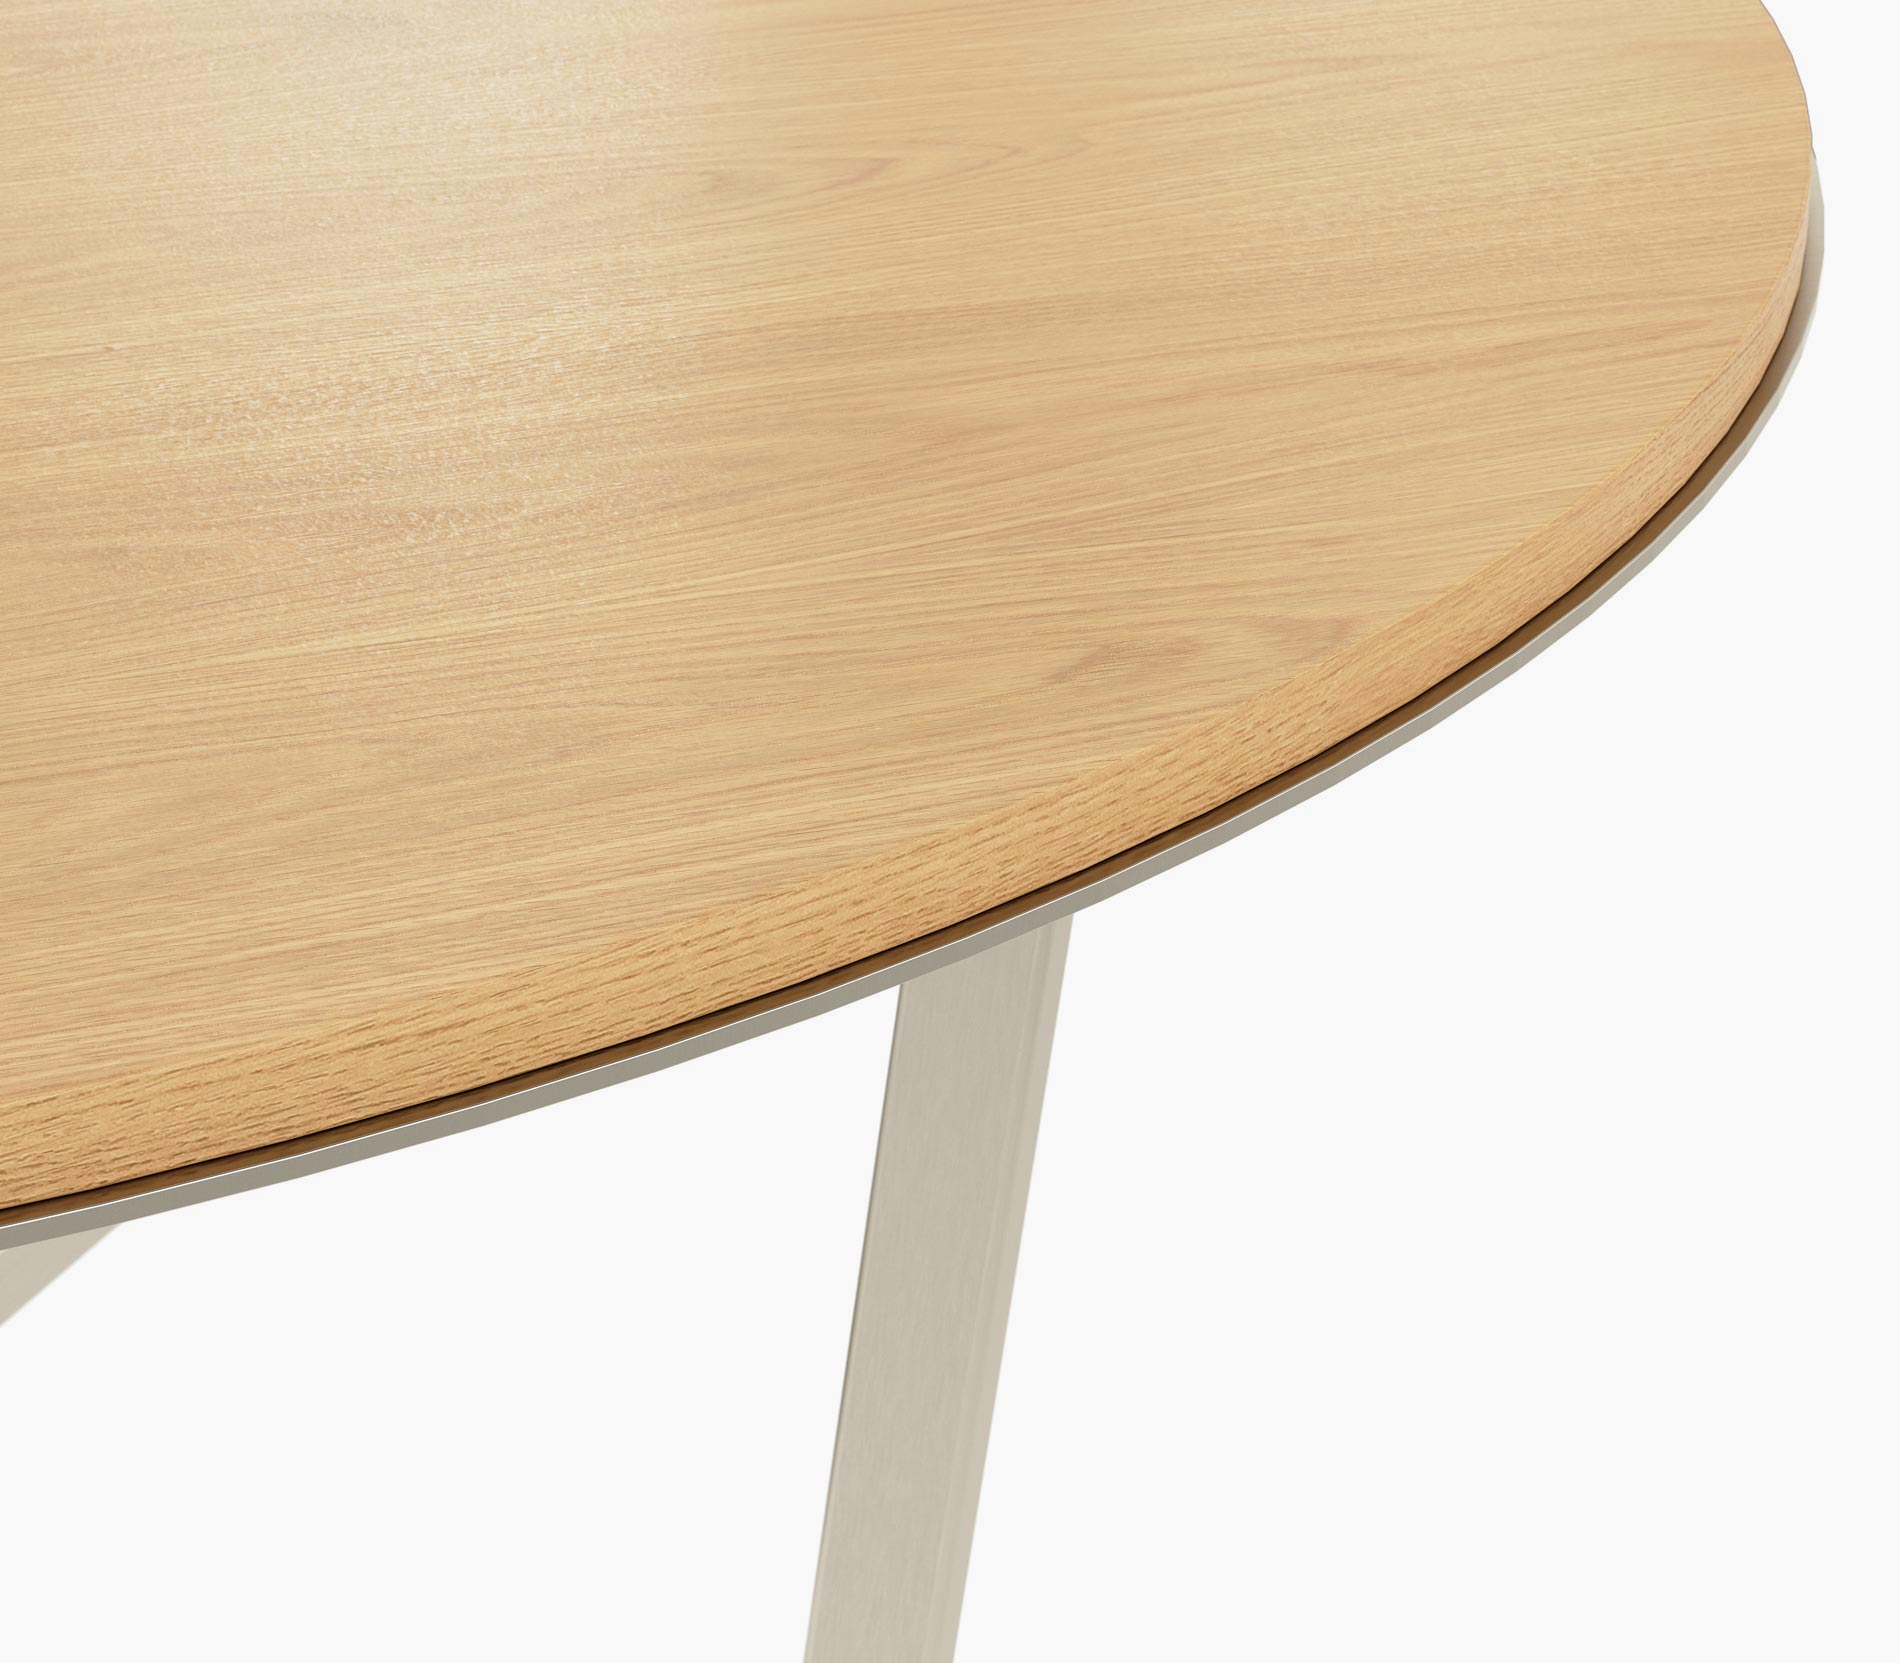 Edge detail on a Circular Highline Meeting Table in natural flat cut oak with a satin nickel edge and base